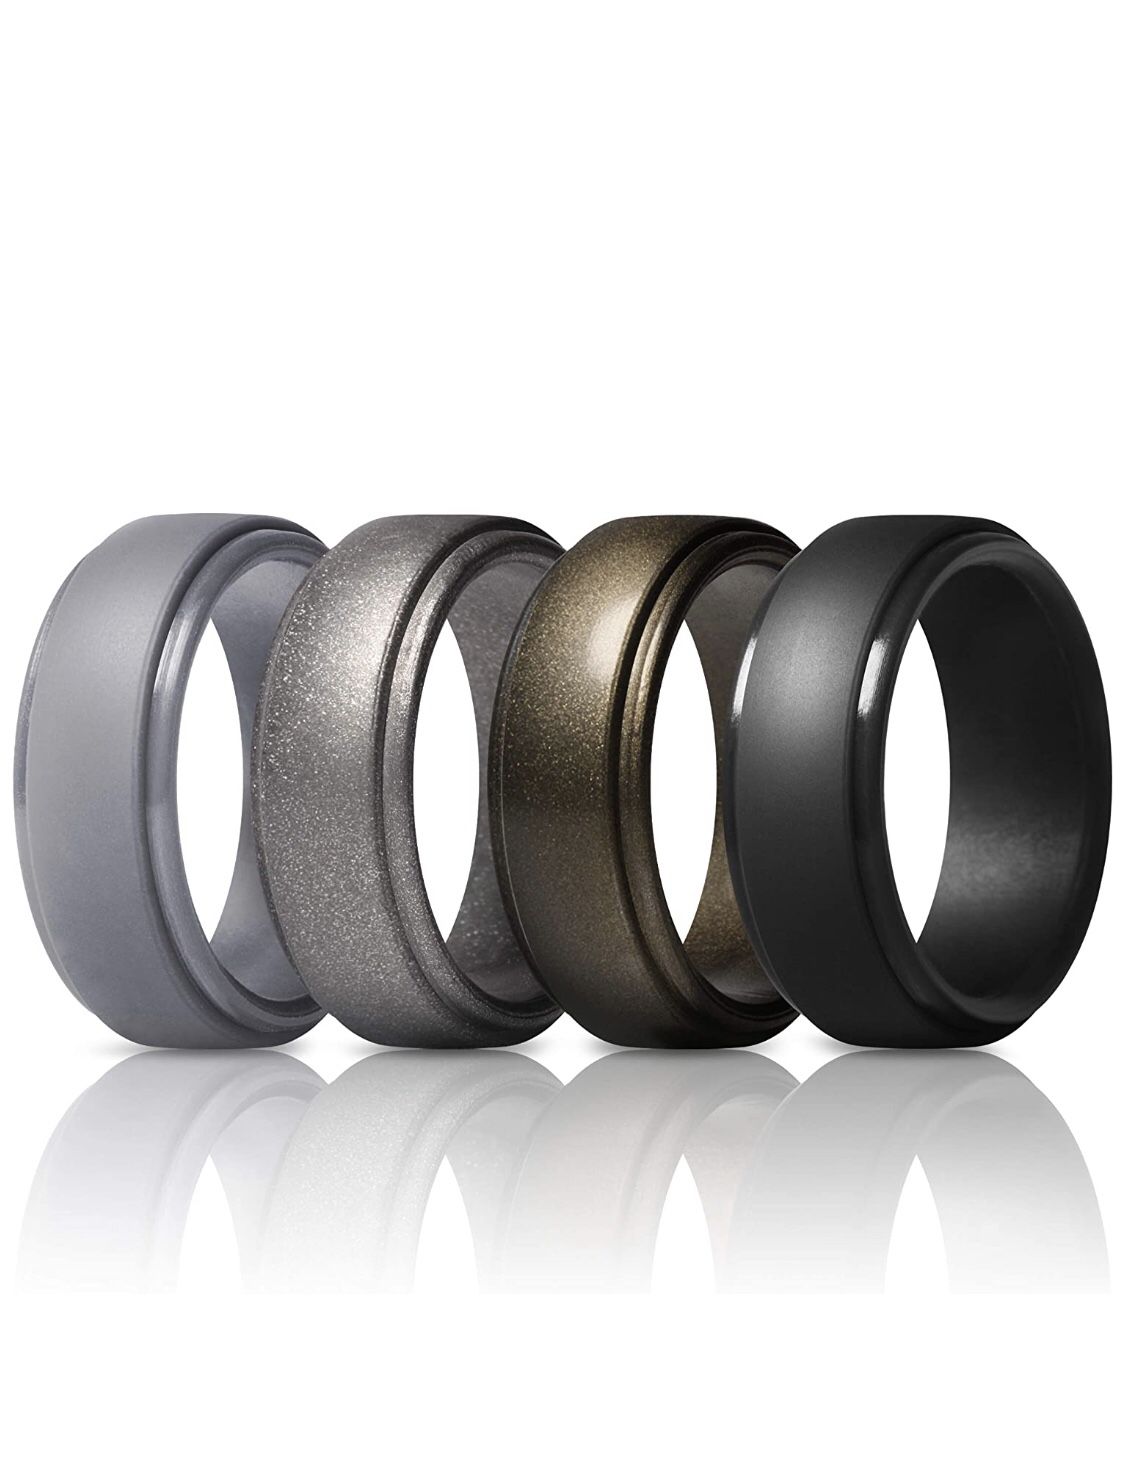 Rubber Wedding Bands 10mm Wide - Size 10.5/11